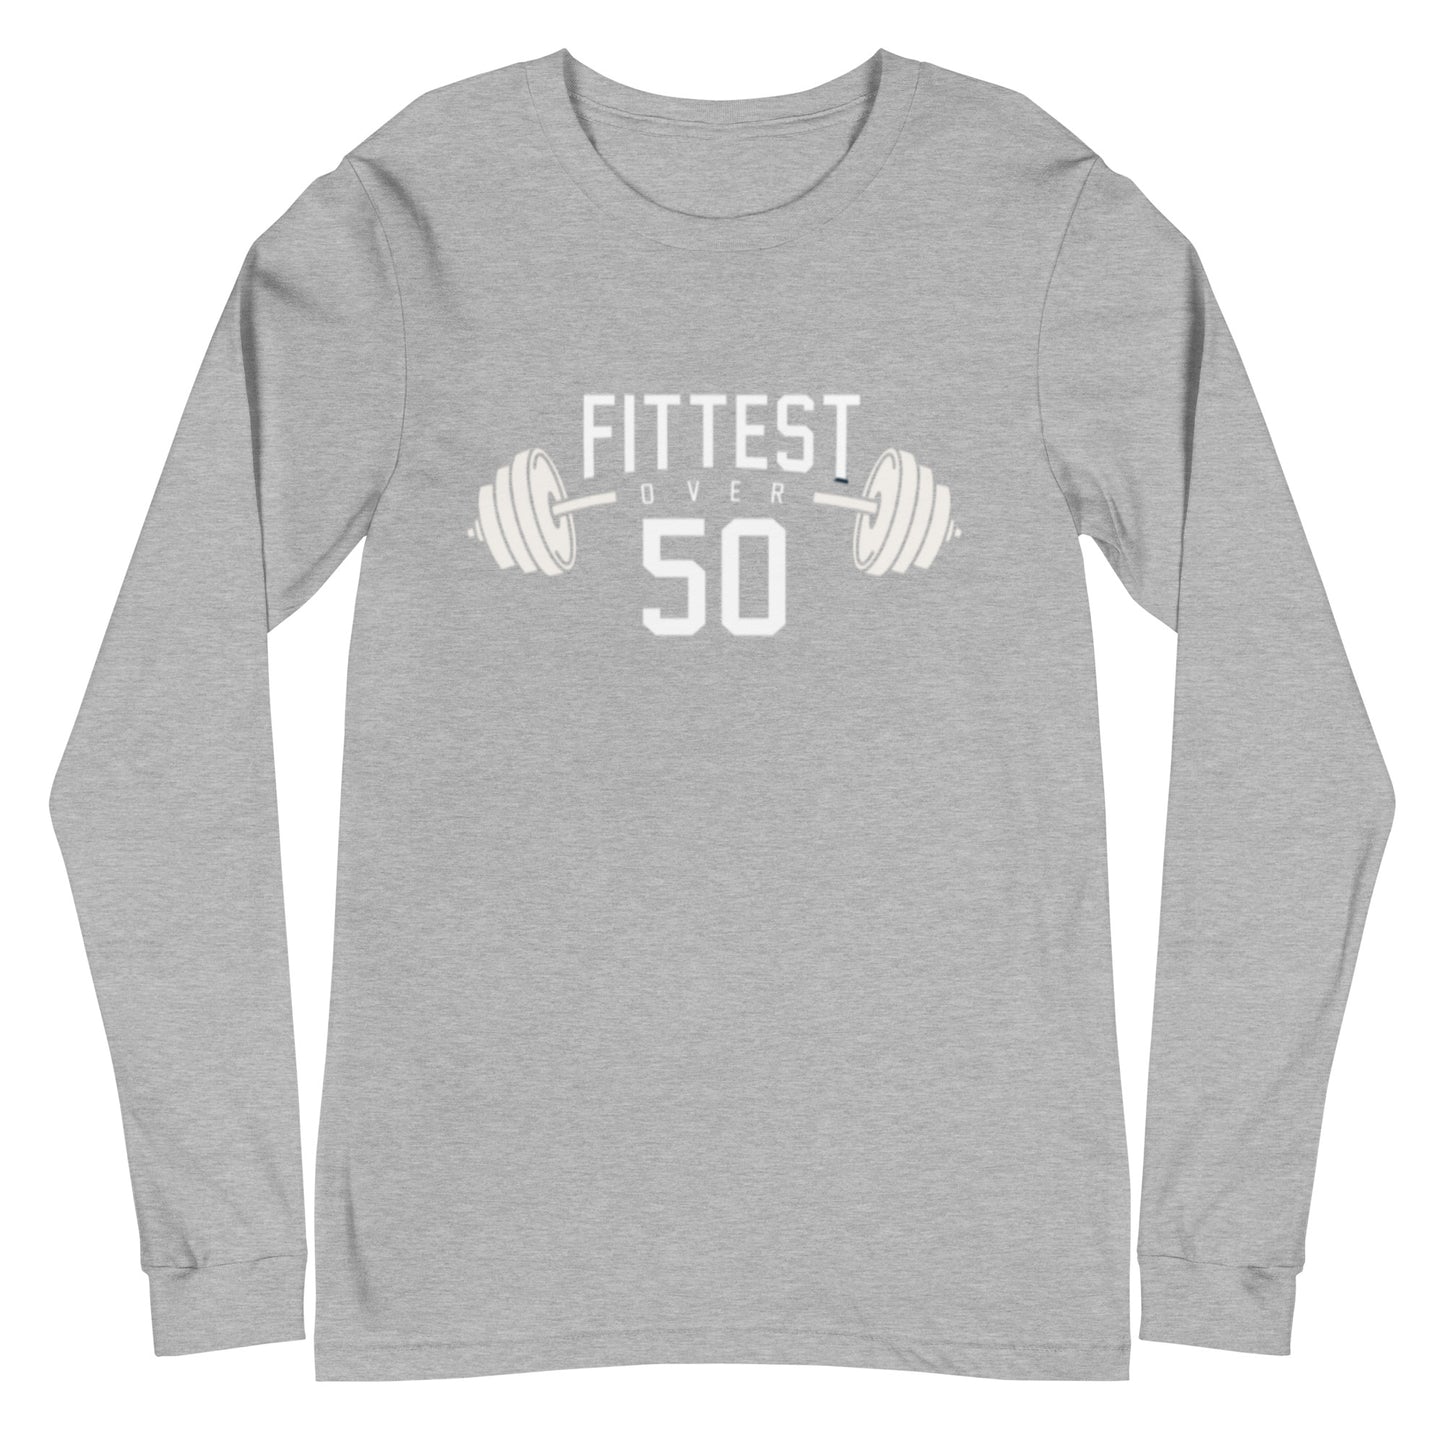 Fittest Over 50 Men's Long Sleeve Tee